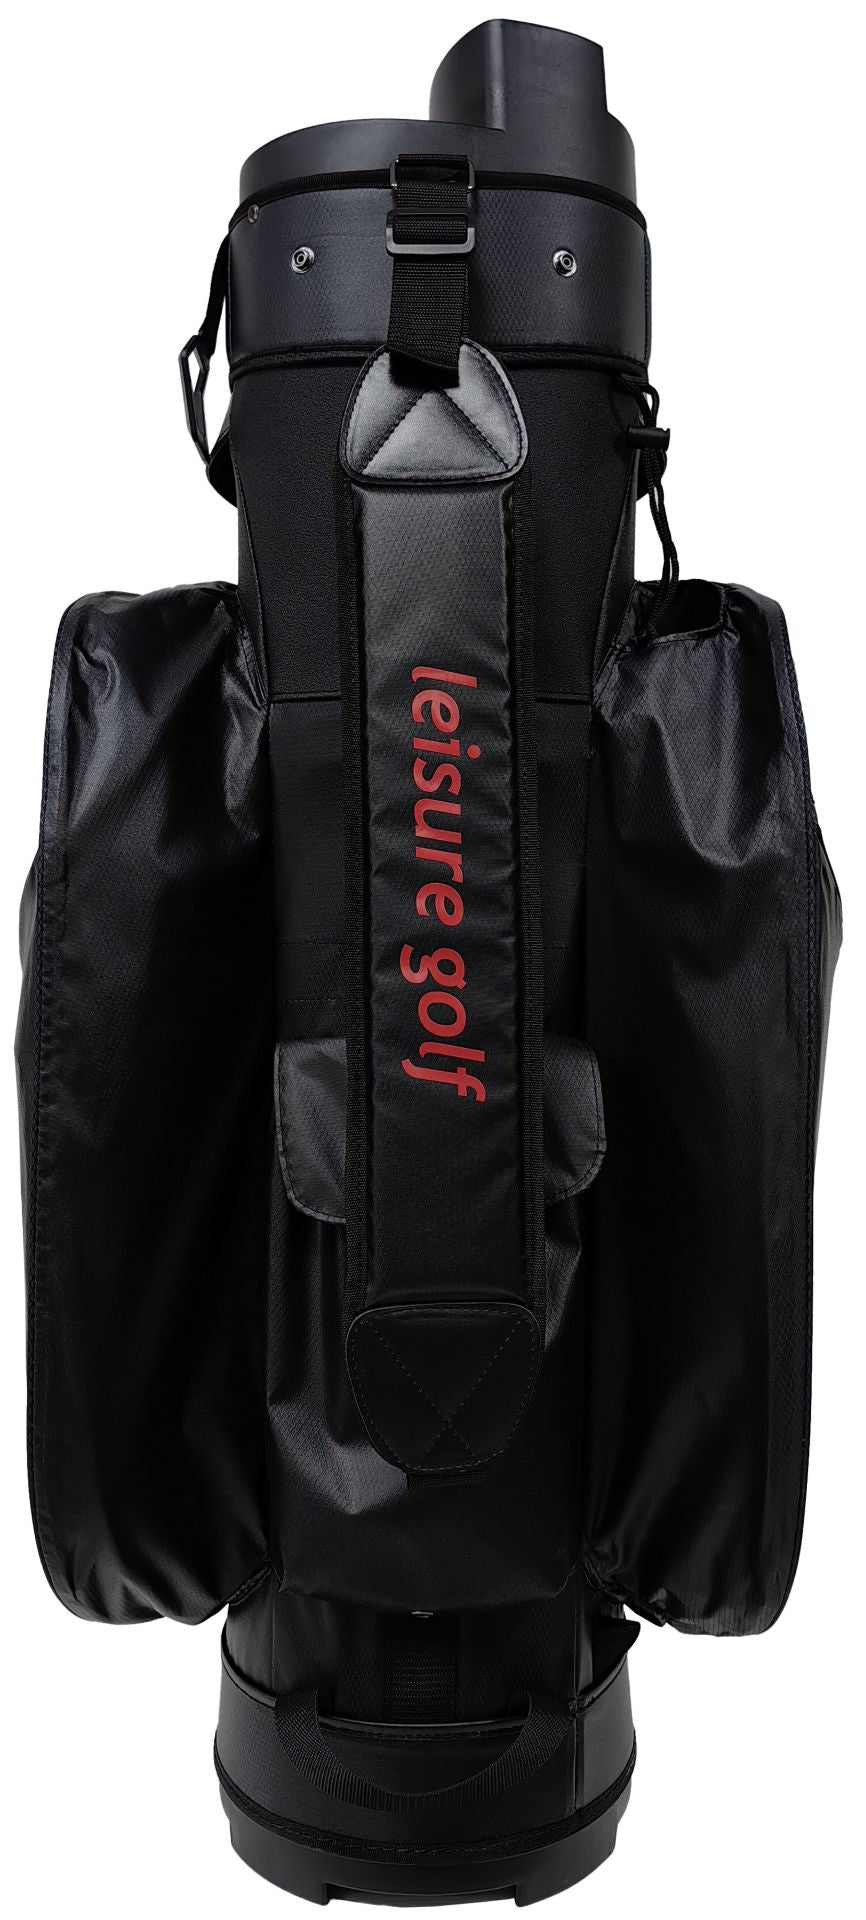 Leisure and Sports Watersafe Organizer Cartbag